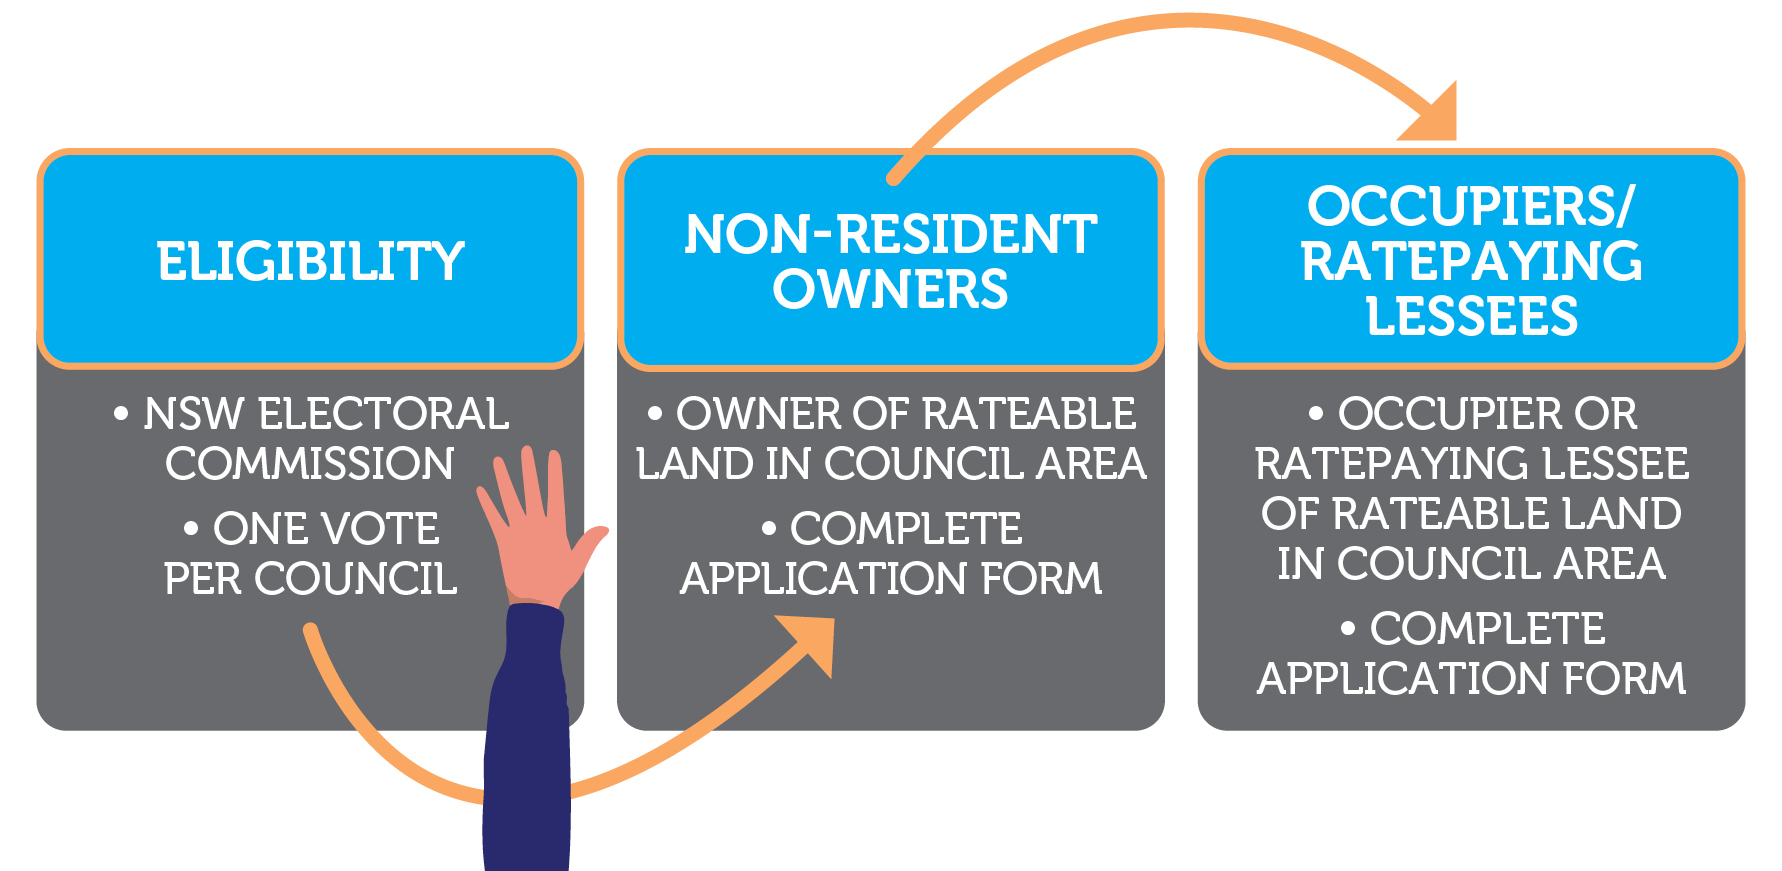 graphic showing eligibility for non-resident owners and occupiers, and rate paying lessees